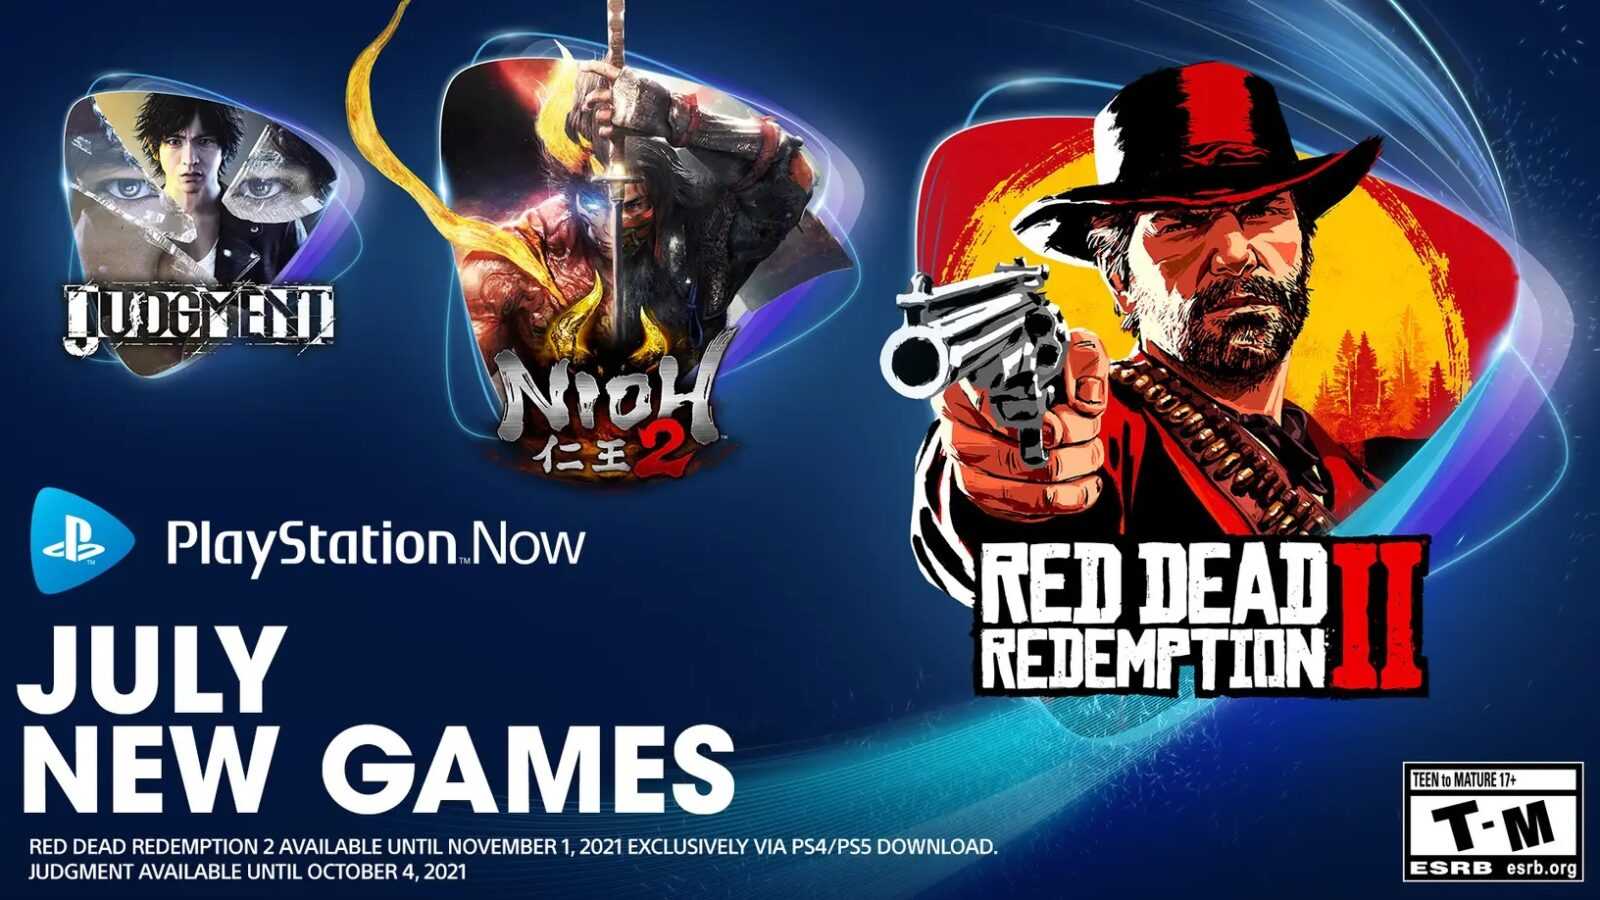 PlayStation Now aggiunge Red Dead Redemption 2 e Judgment per luglio 2021